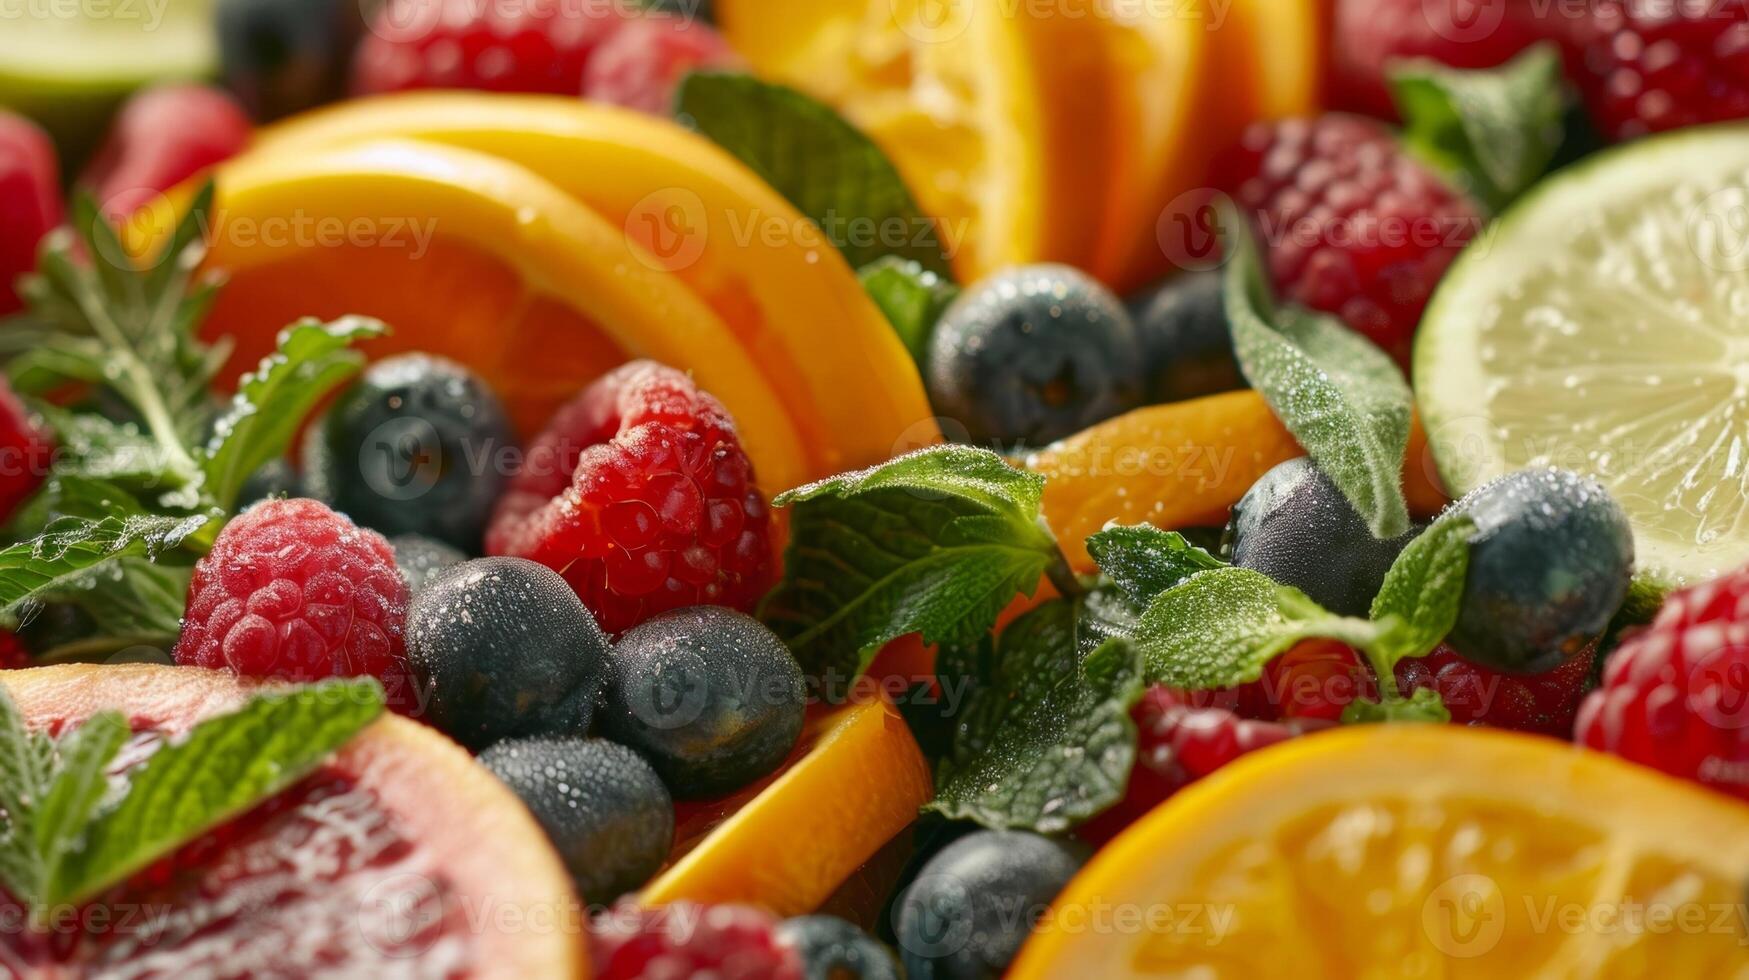 A colorful spread of fresh fruits and herbs used to infuse nonalcoholic beverages in a baking and mixology class photo